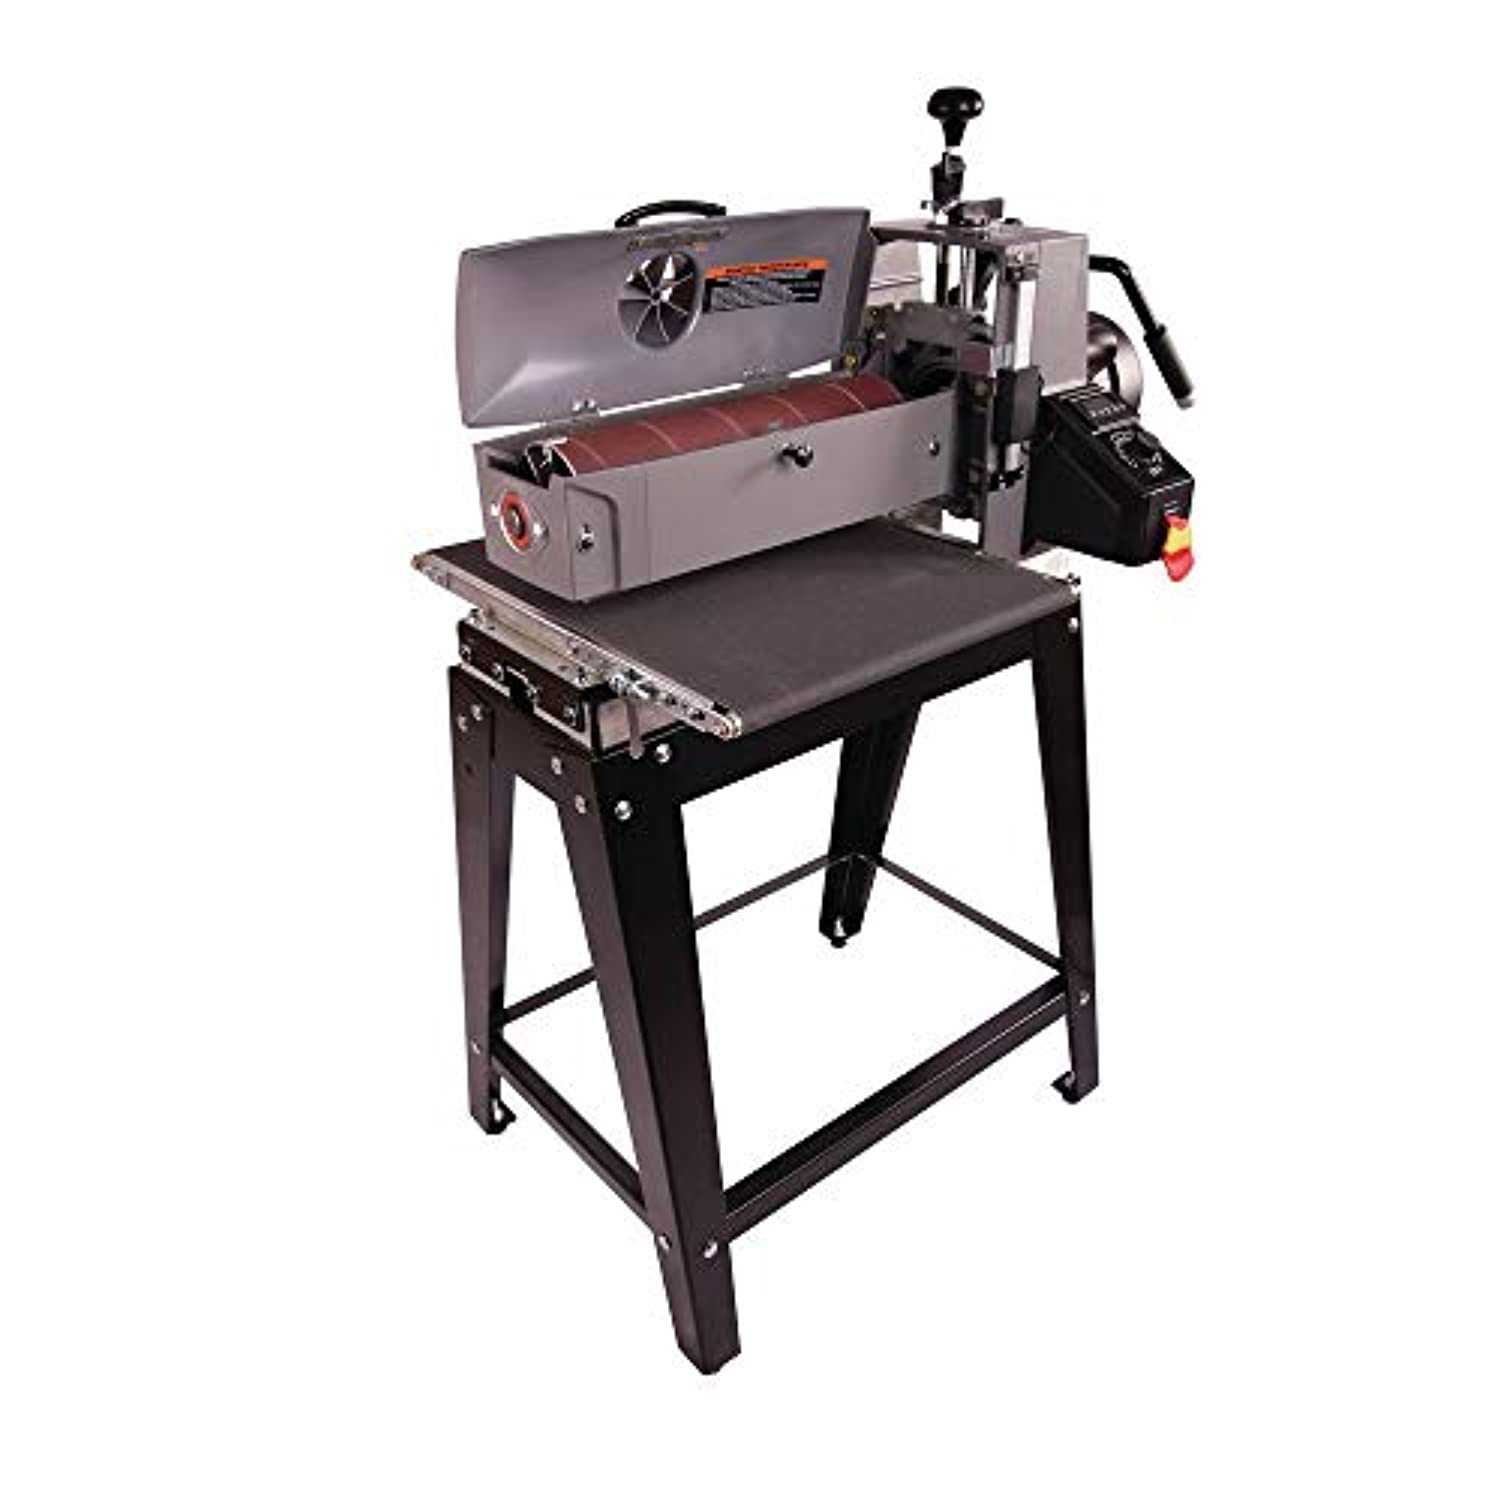 SUPERMAX TOOLS Drum Sander with Stand, Built-in Digital Read Out, Patented Quick Lever Adjustment and Turbo Vented Dust Port - Model 16-32